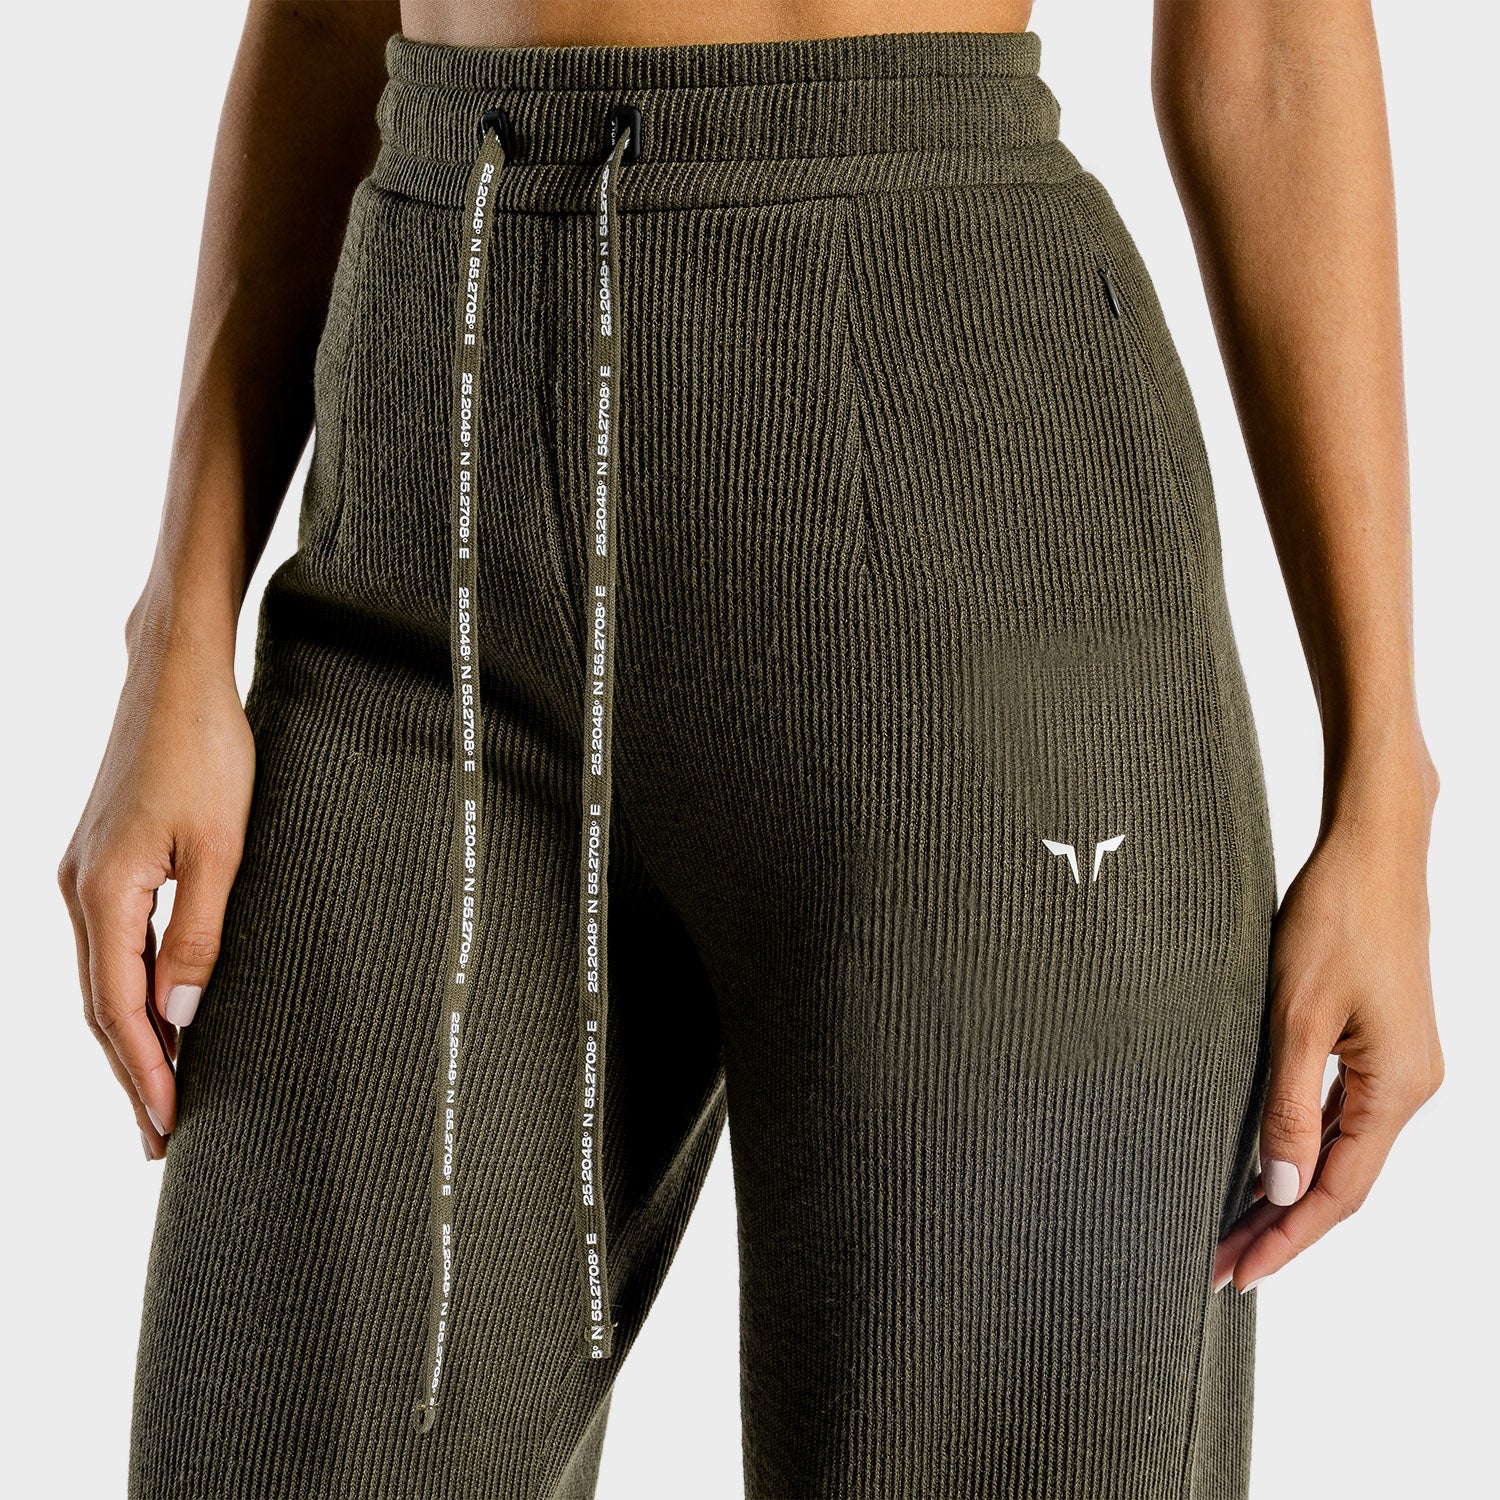 Lux Cyprus High Rise Flared Leg Pants, Workout Bottoms